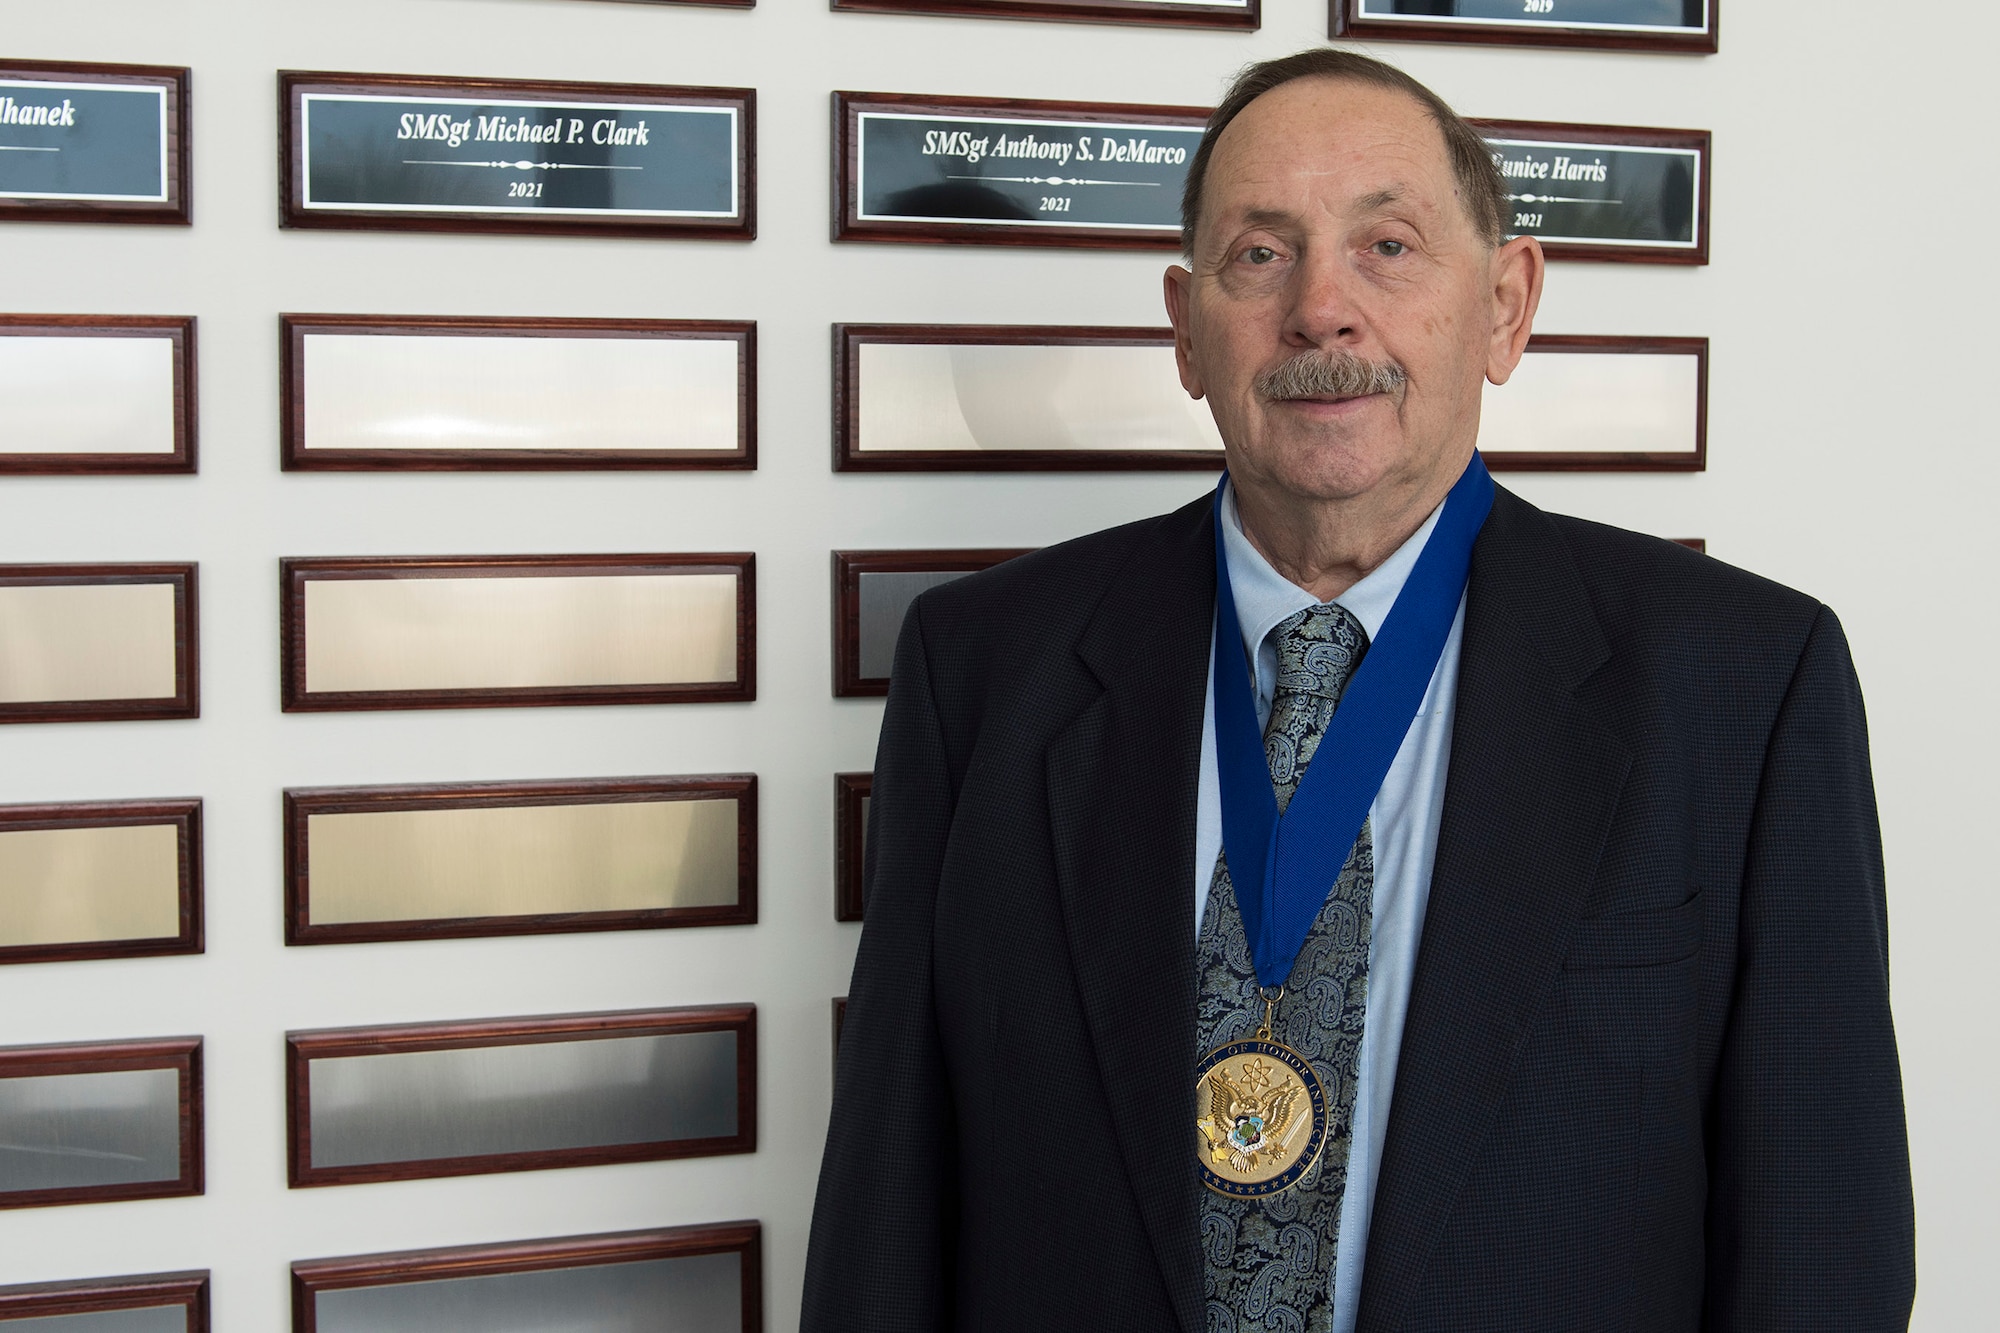 Tony DeMarco, a retired Air Force senior master sergeant, stands in front of his plaque after his induction to the Air Force Technical Applications Center's Wall of Honor during a ceremony May 26, 2021.  Seen around DeMarco's neck is the medallion that is presented to each honoree who, through the course of their career at AFTAC, demonstrated great character and whose actions truly discriminated them from thousands of other center employees, both military and civilian. (U.S. Air Force photo by Matthew S. Jurgens)